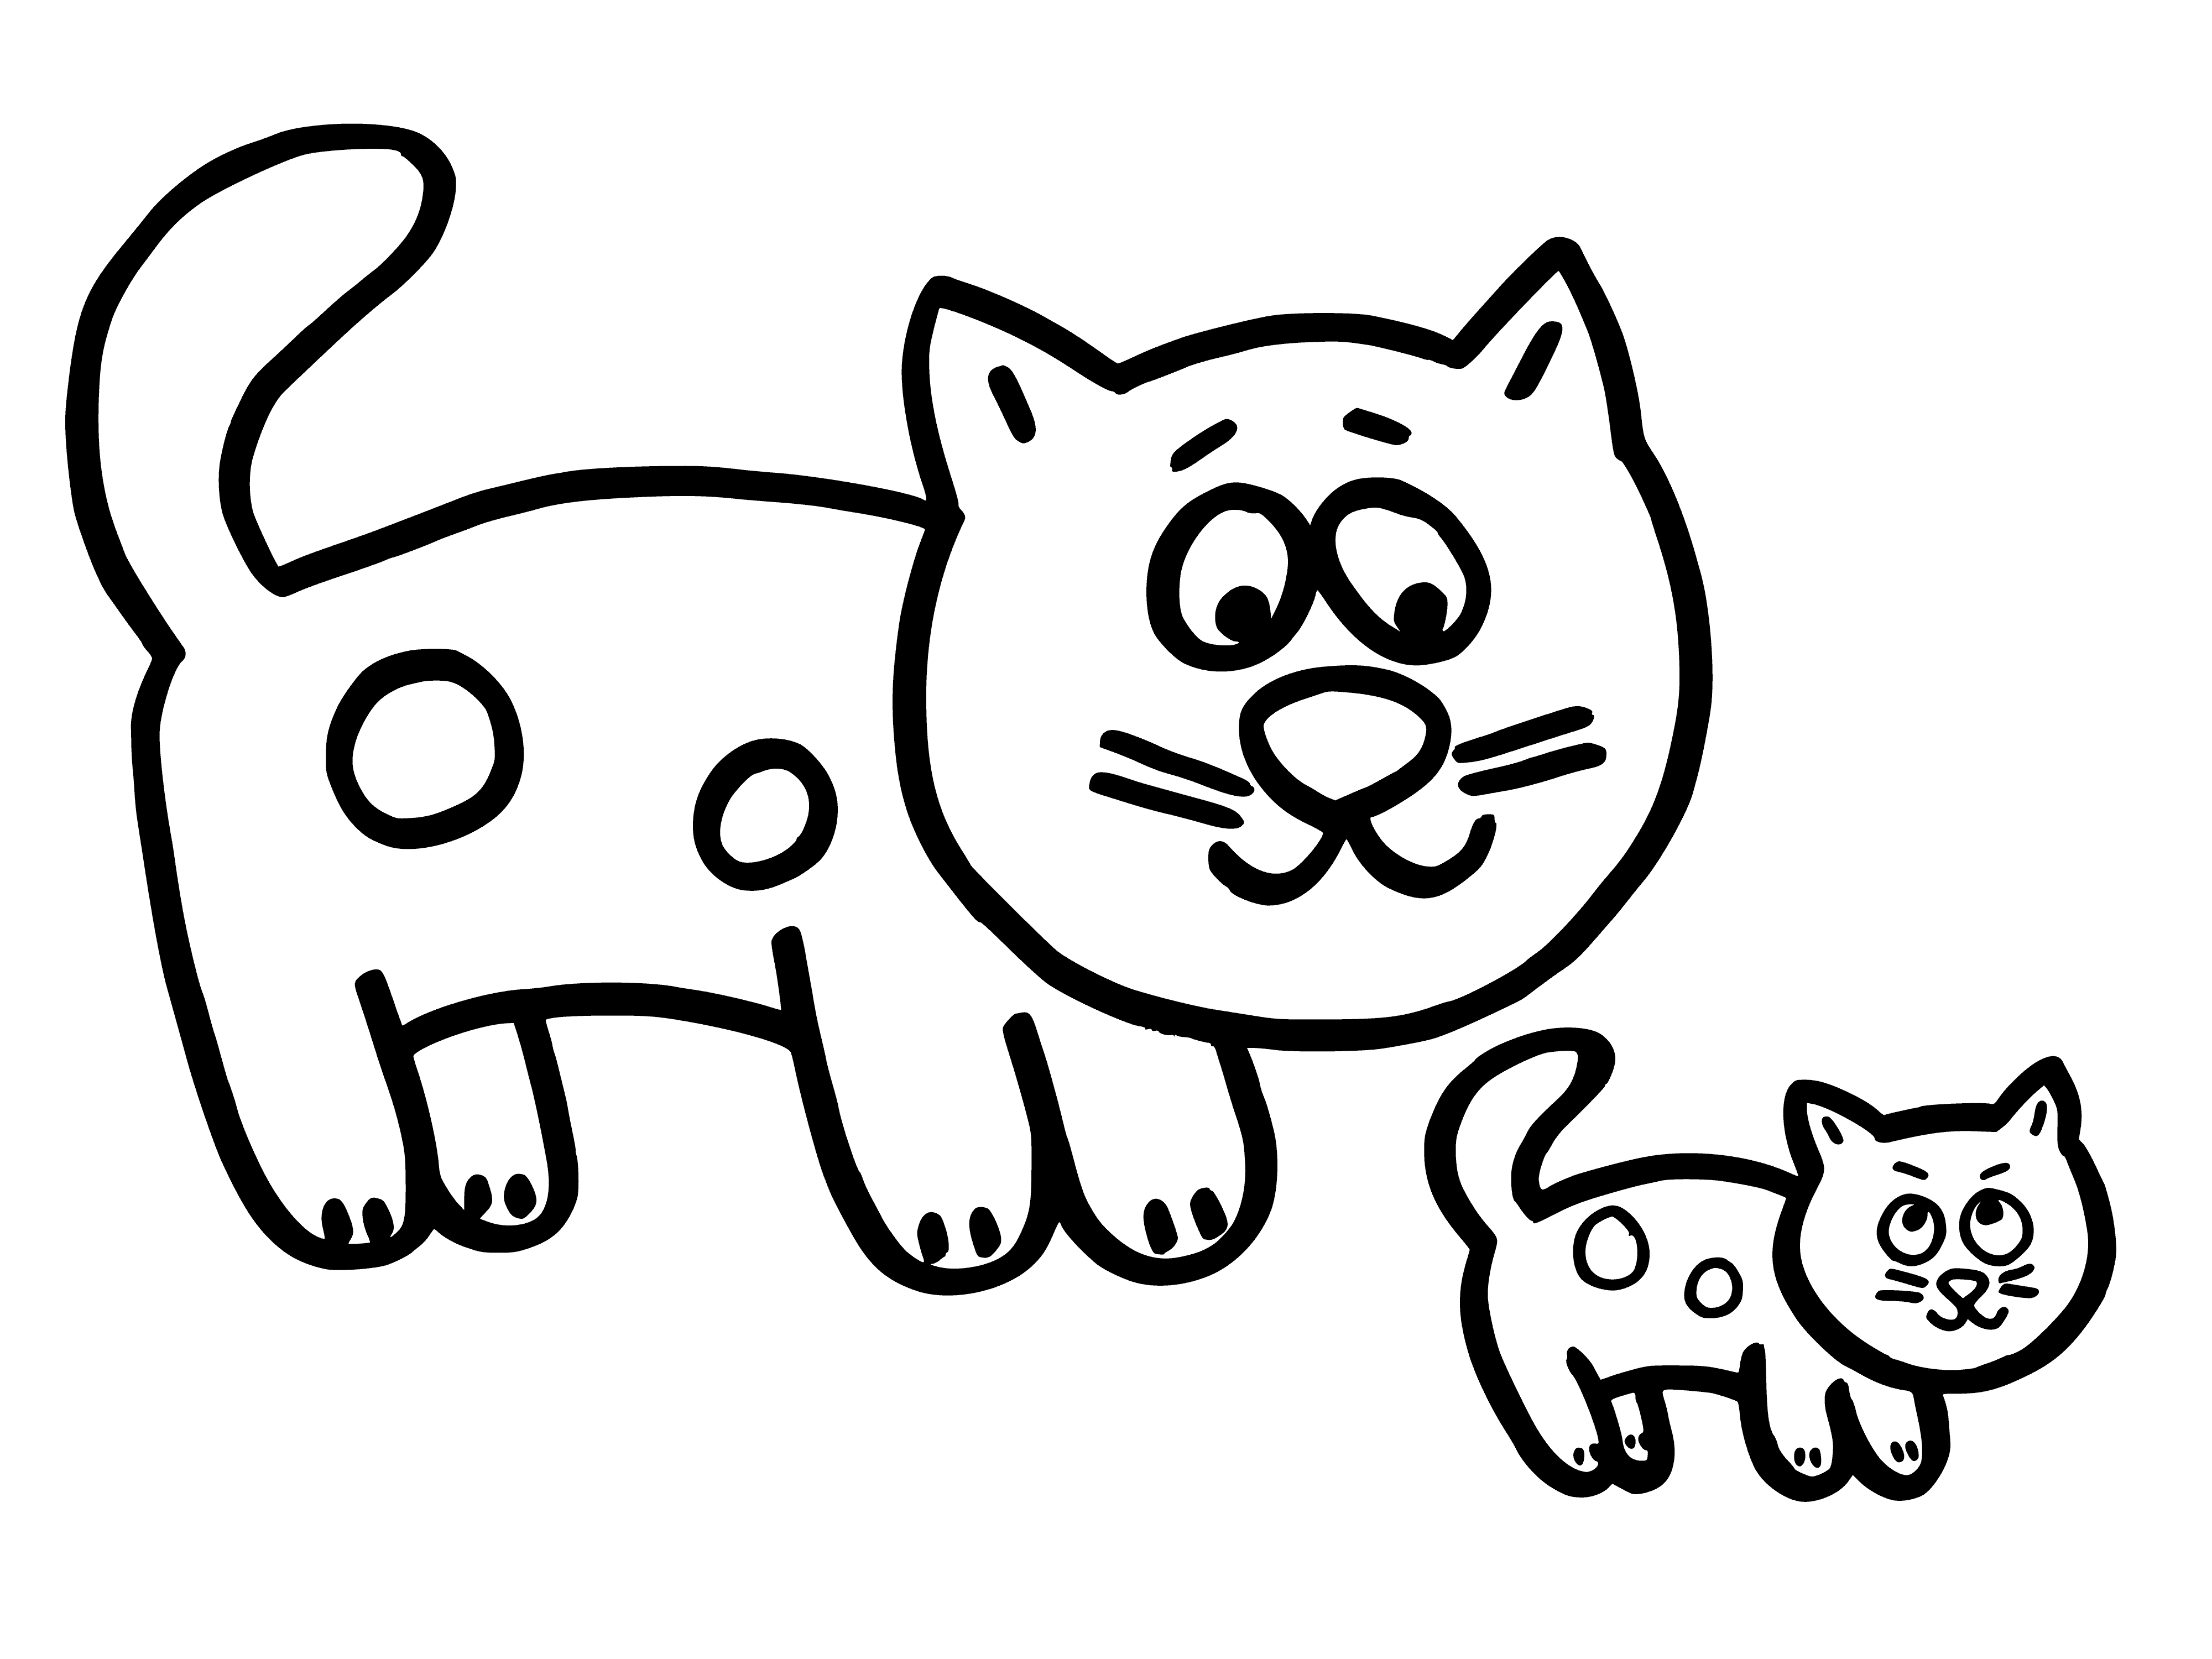 Cat with kitten coloring page